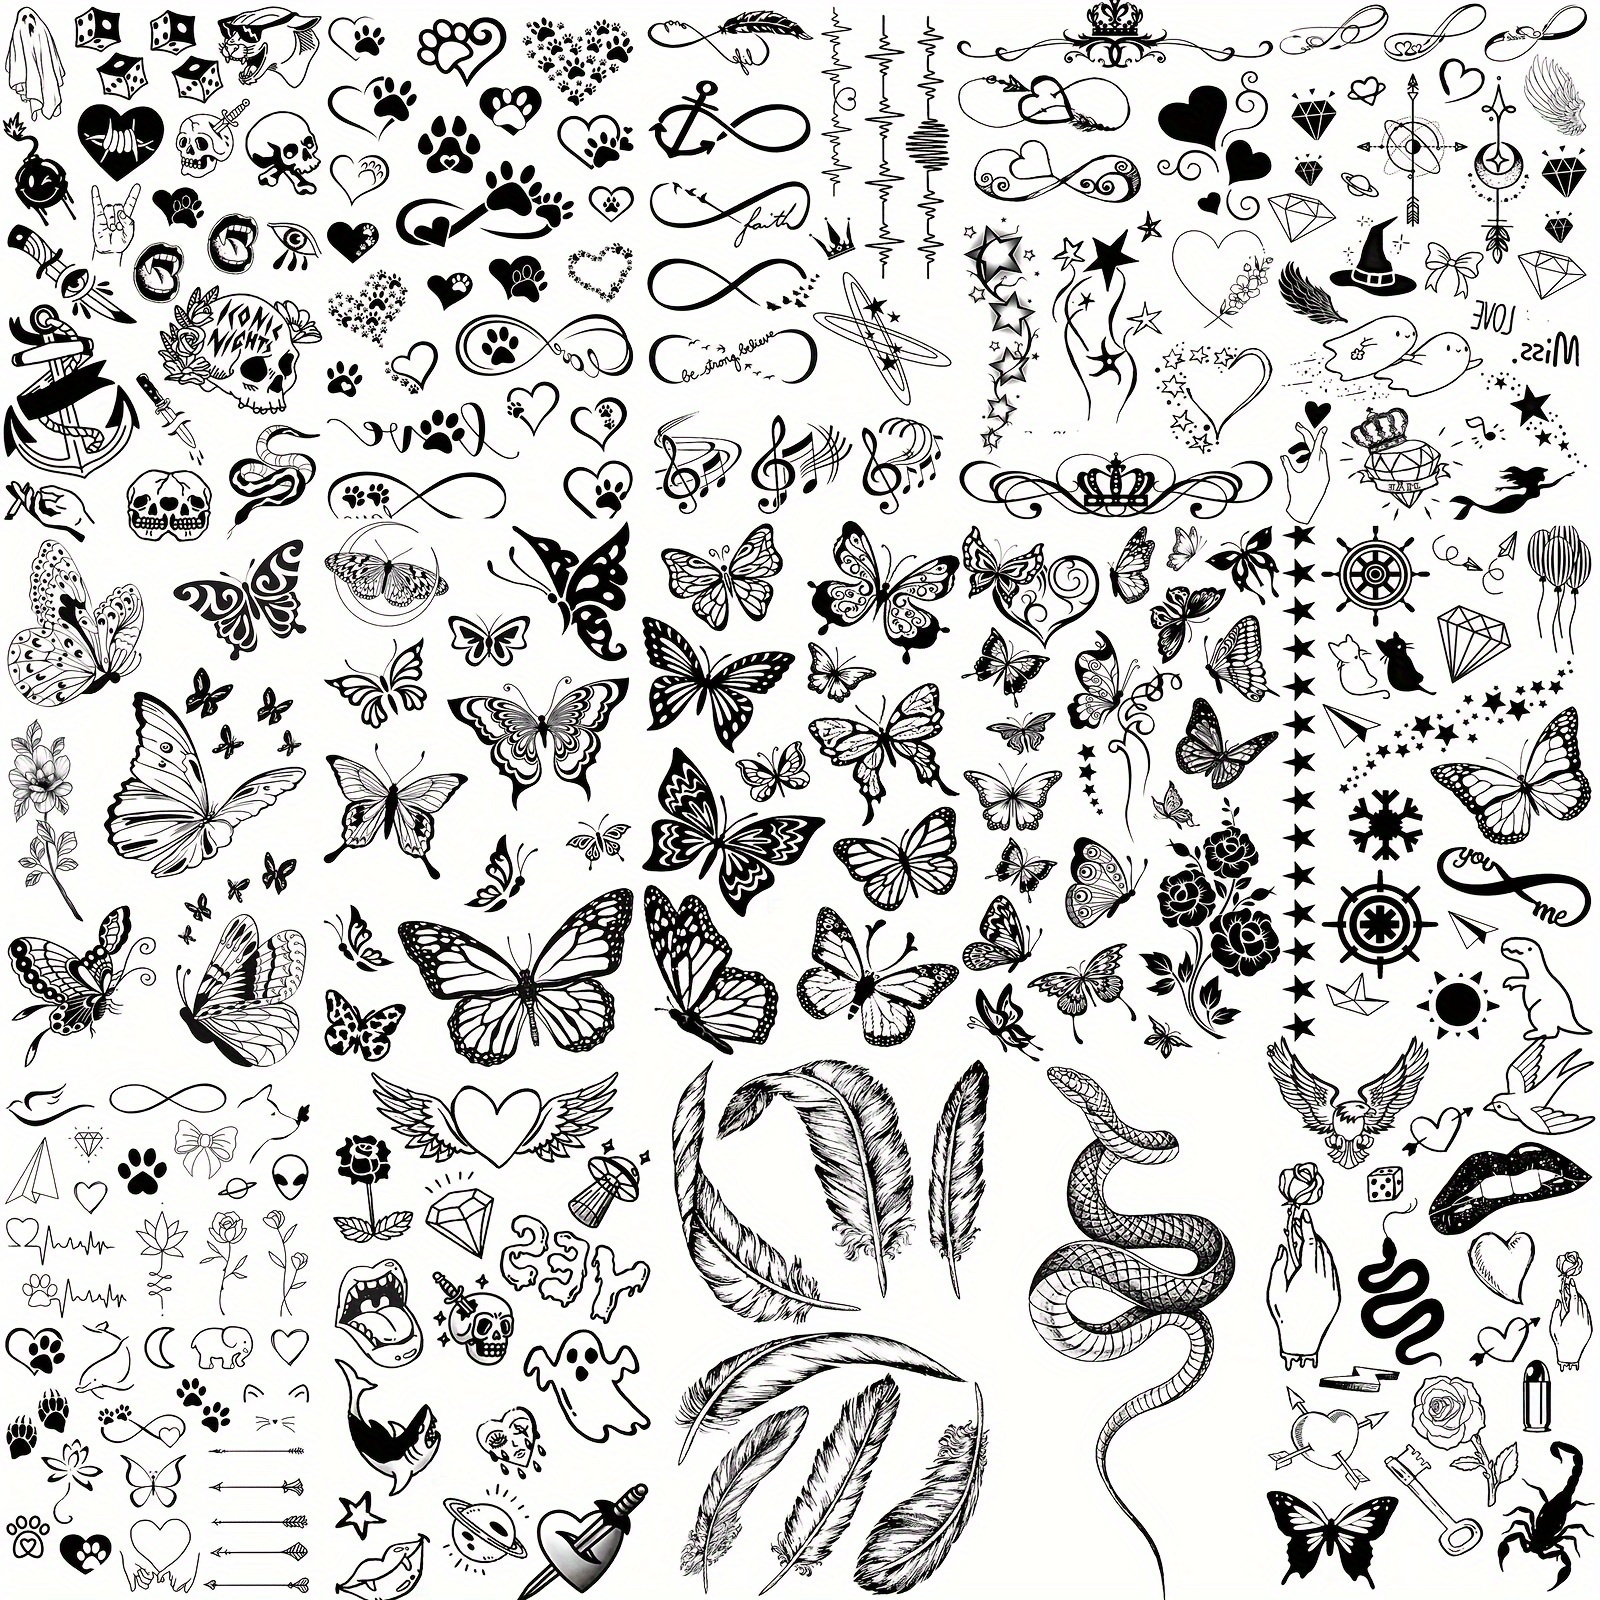 

15 Sheets Small Butterfly Temporary Tattoos For Women Girls Adults Waterproof Fake Tattoo Stickers, Snake Feather Infinity Cute Tattoos Neck Hands Finger